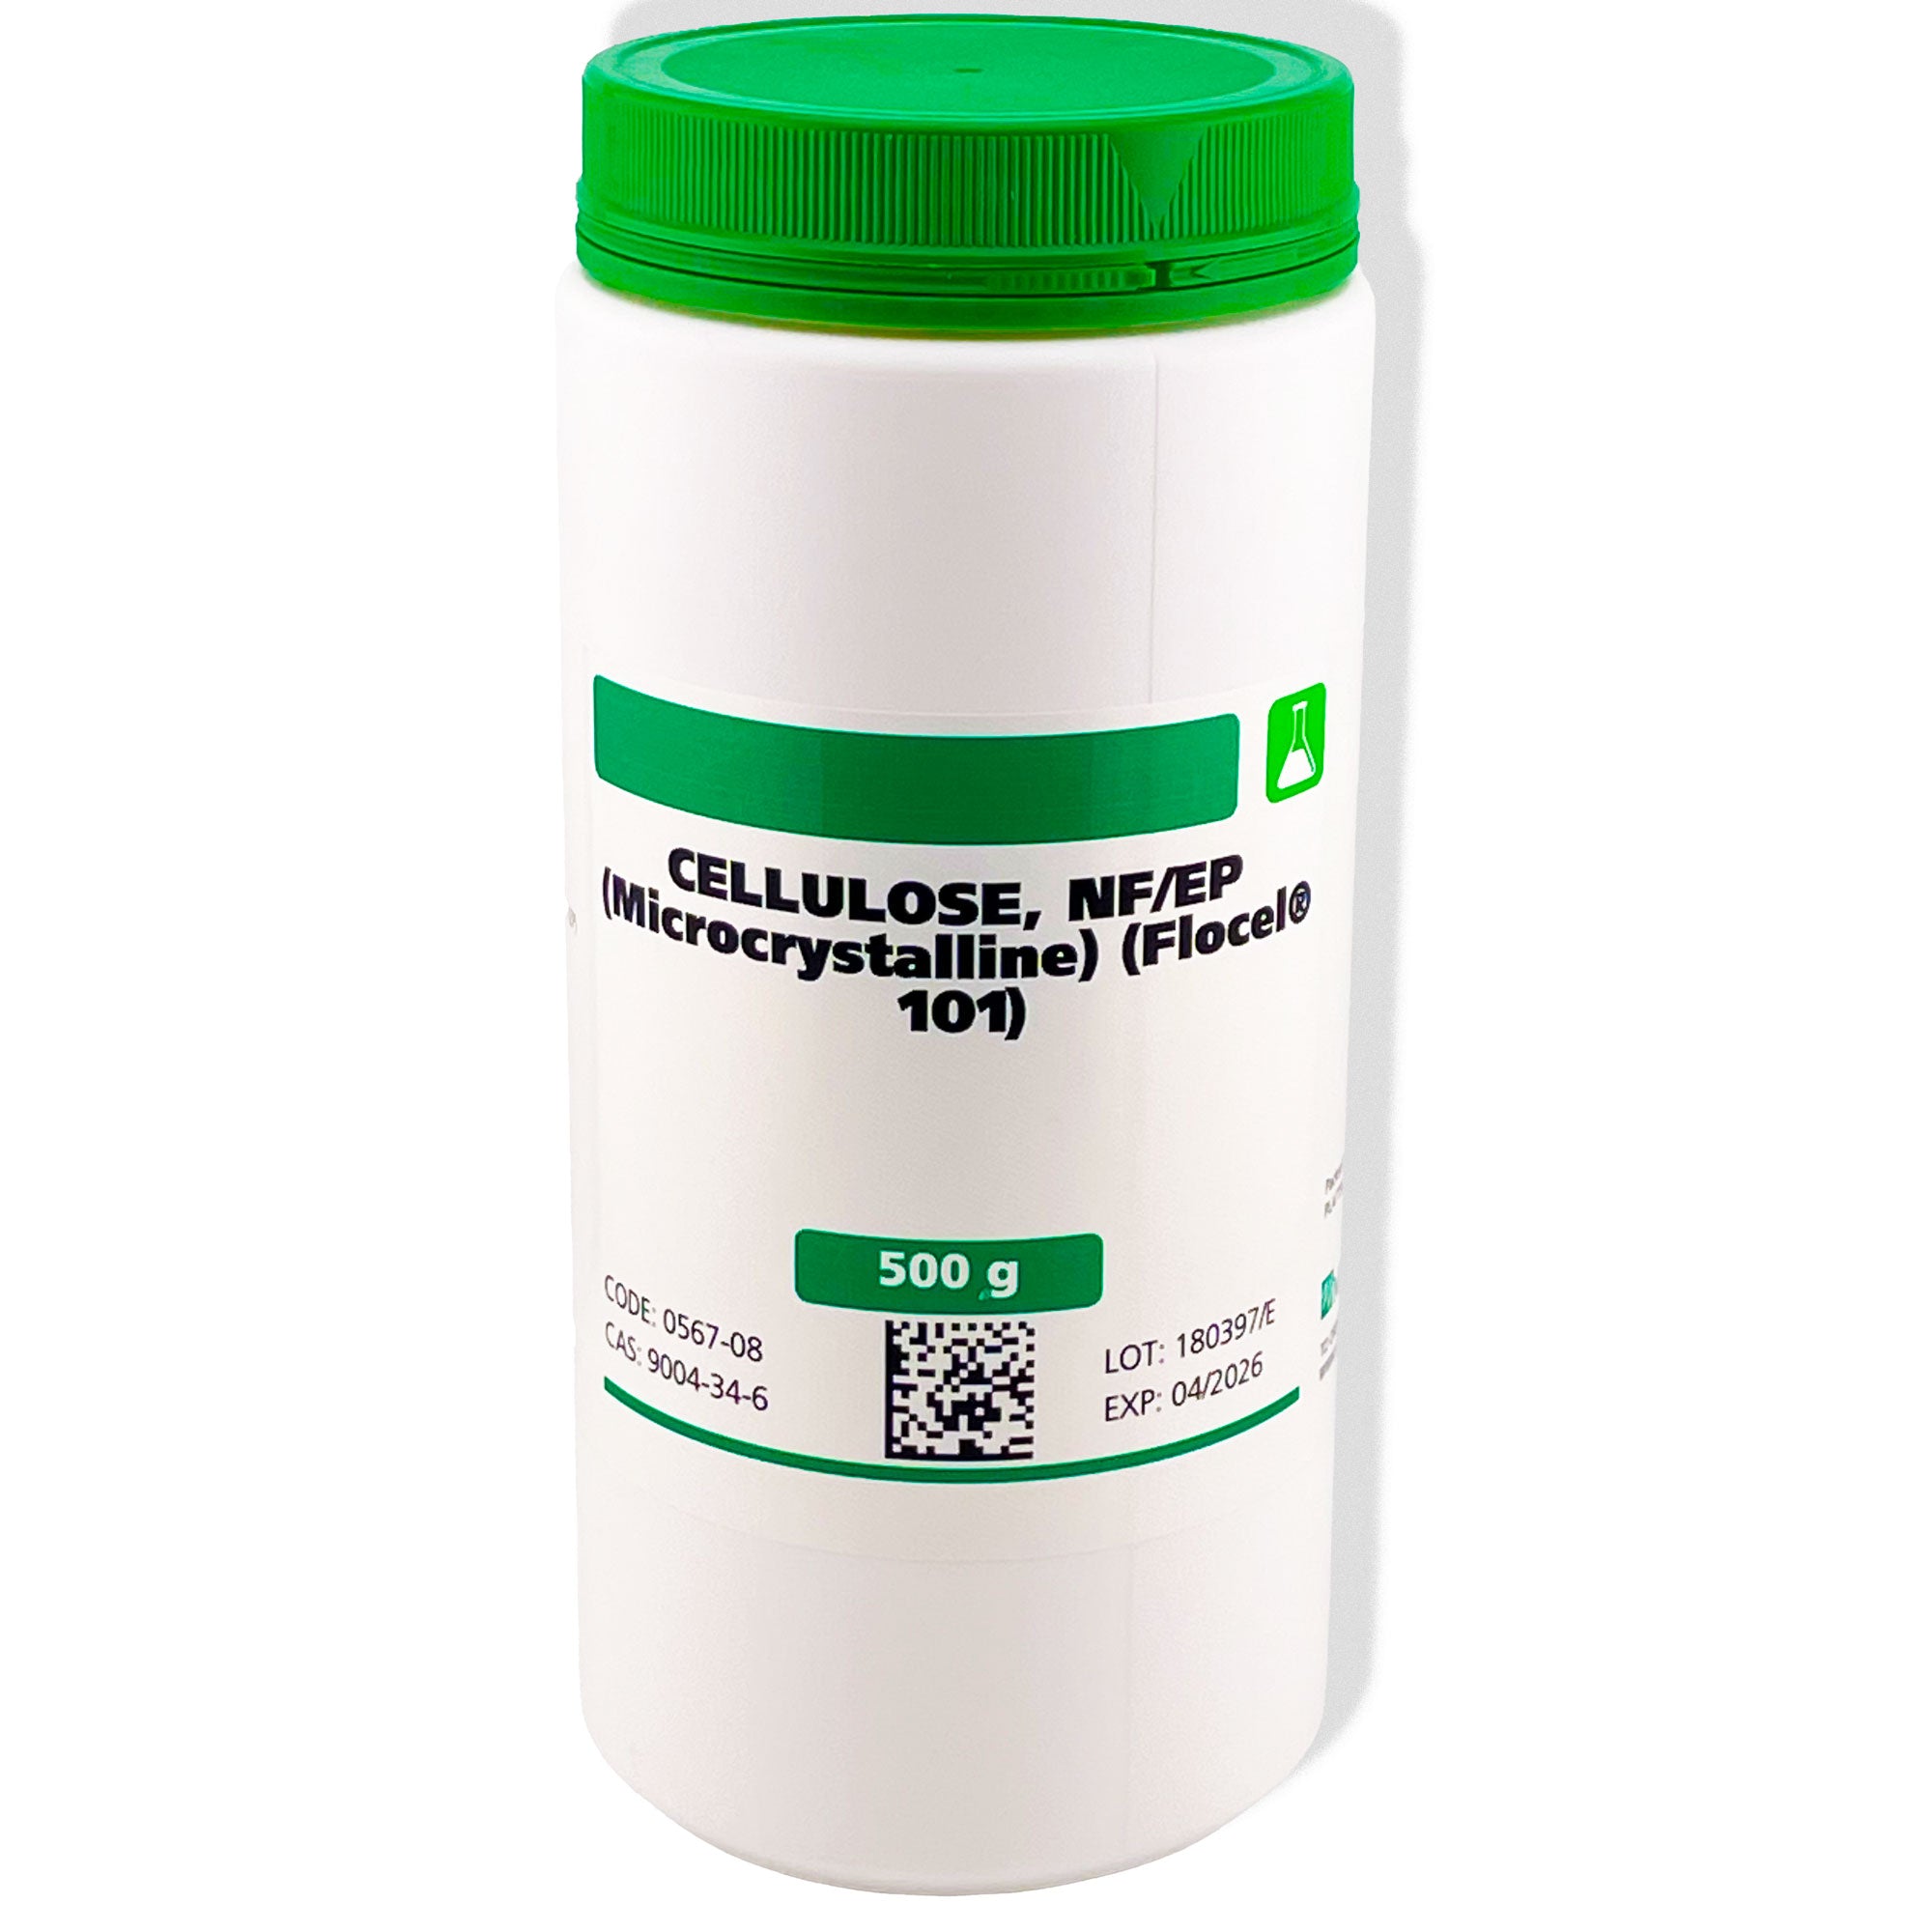 Cellulose, NF/EP (Microcrystalline)